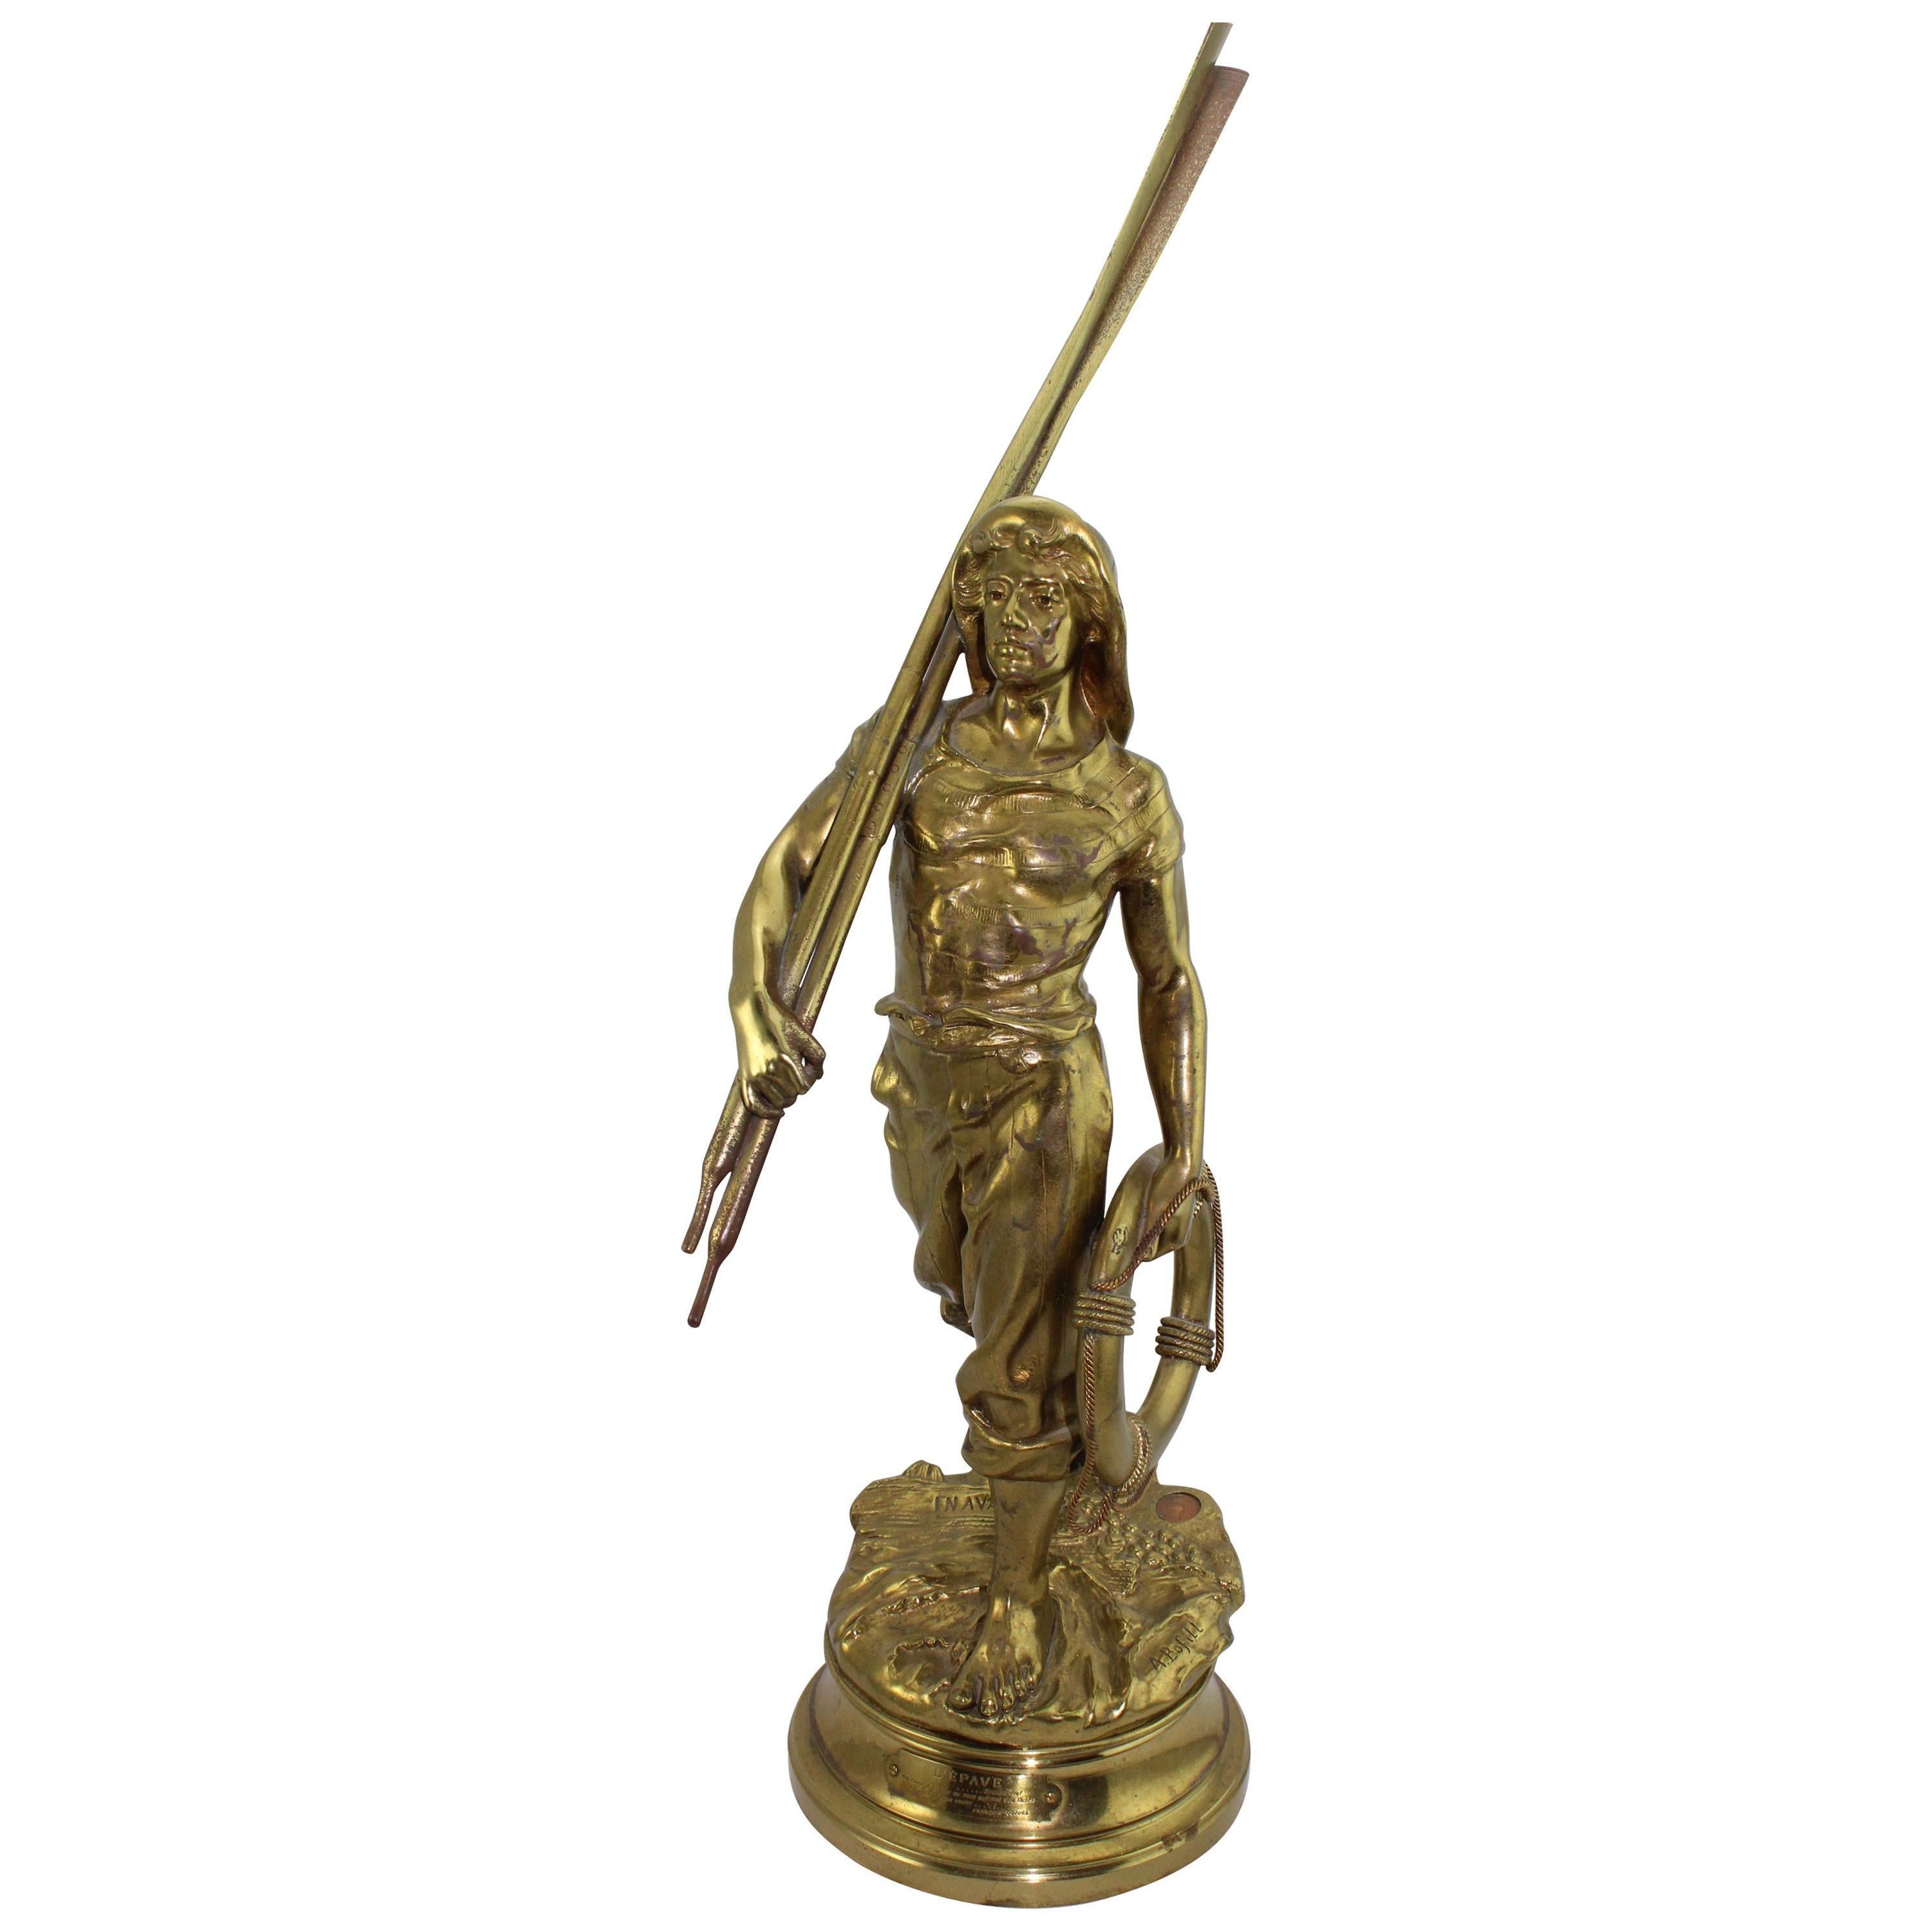 This larger than life gold gilded bronze of a sea man with oars will decorate any area and be a great conversation piece. The composition and casting detail are amazing. This is the largest of these models standing at 25 inches. 
En Avant" meaning